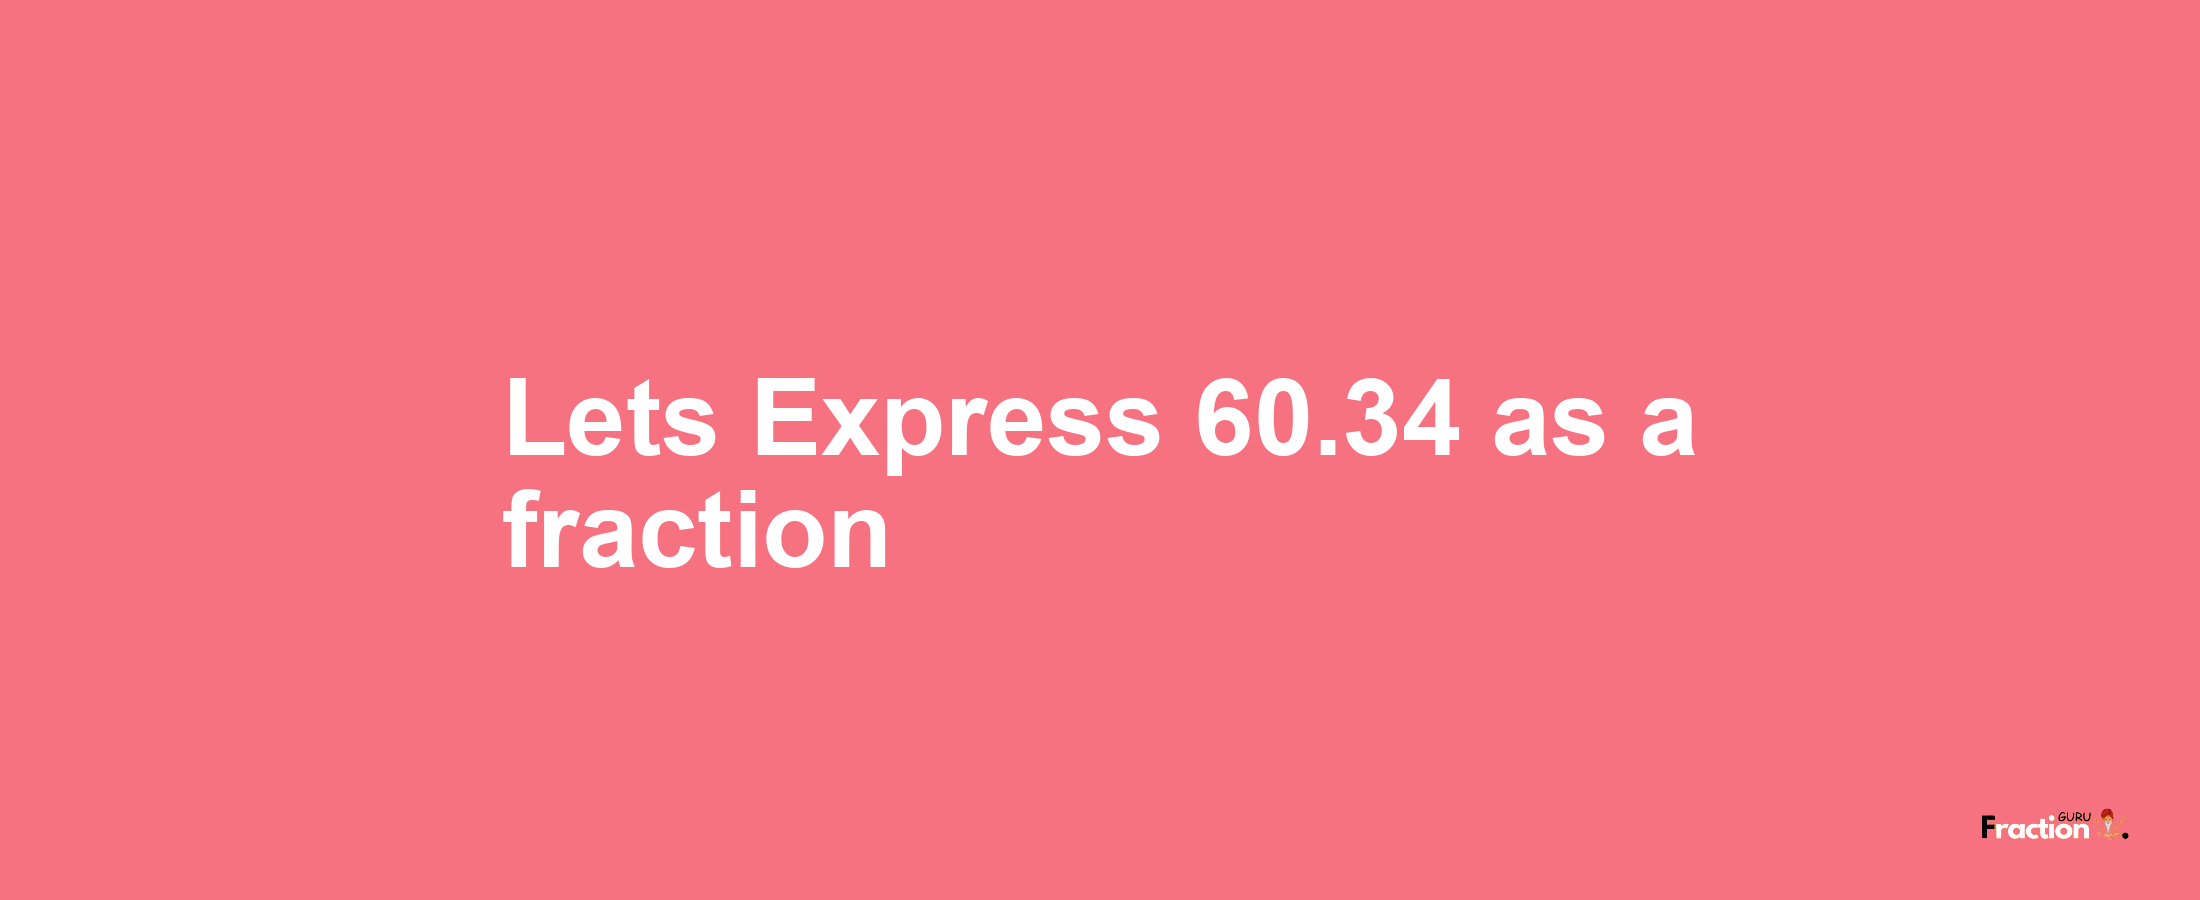 Lets Express 60.34 as afraction